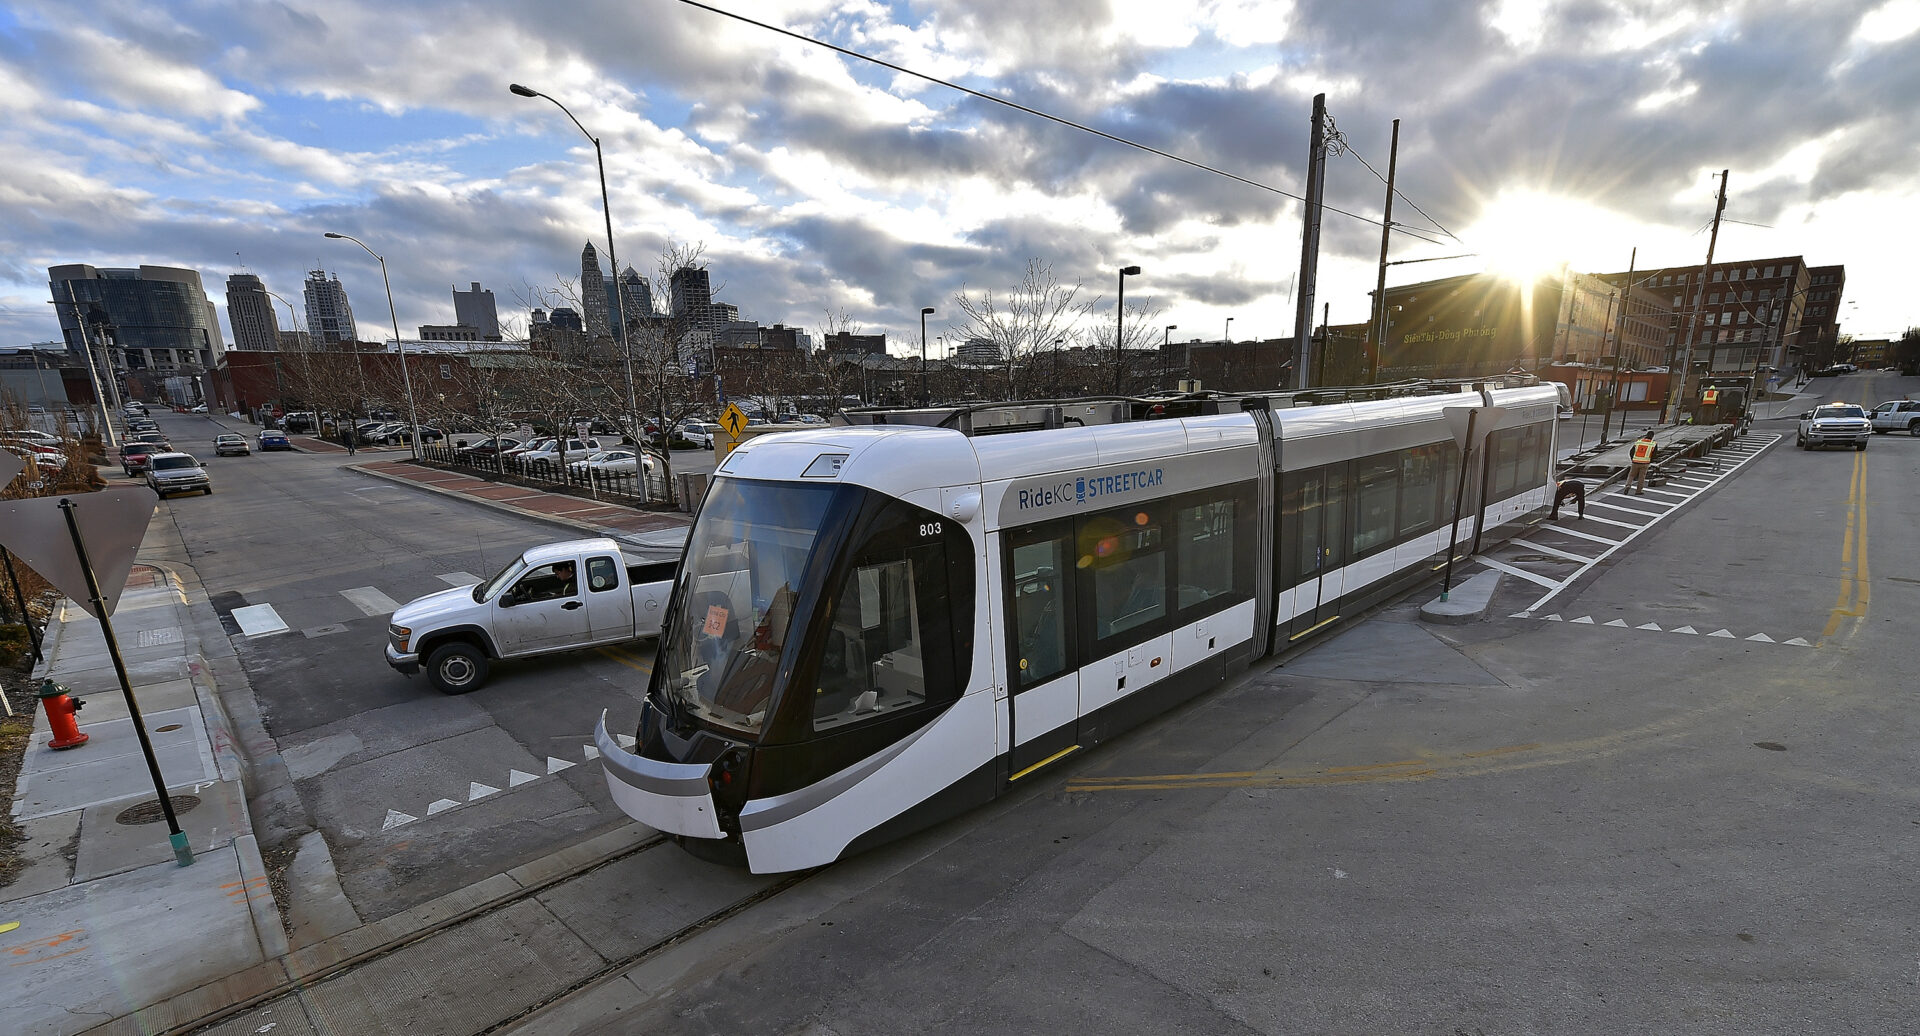 A streetcar to be delivered to Kansas City is offloaded from its trailer on Wednesday, Feb. 3, 2016, in Kansas City, Mo. The city is on schedule to begin service in April. (John Sleezer/Kansas City Star/TNS via Getty Images)